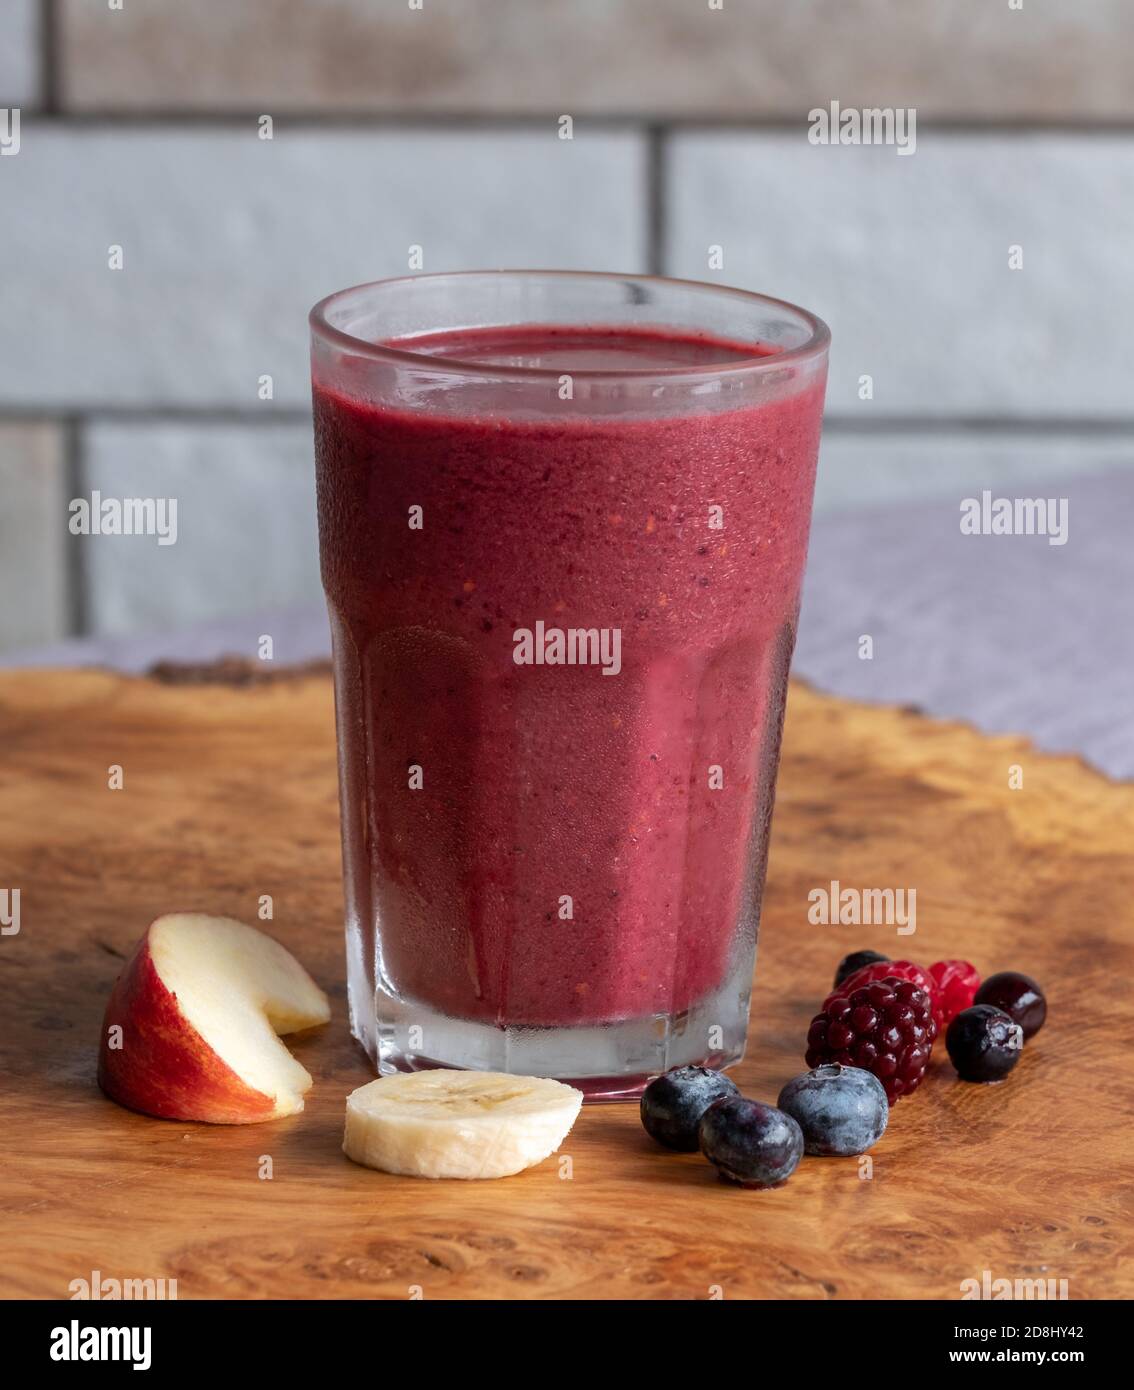 Glass of berry, banana and apple smoothie, served on a wooden platter. Stock Photo